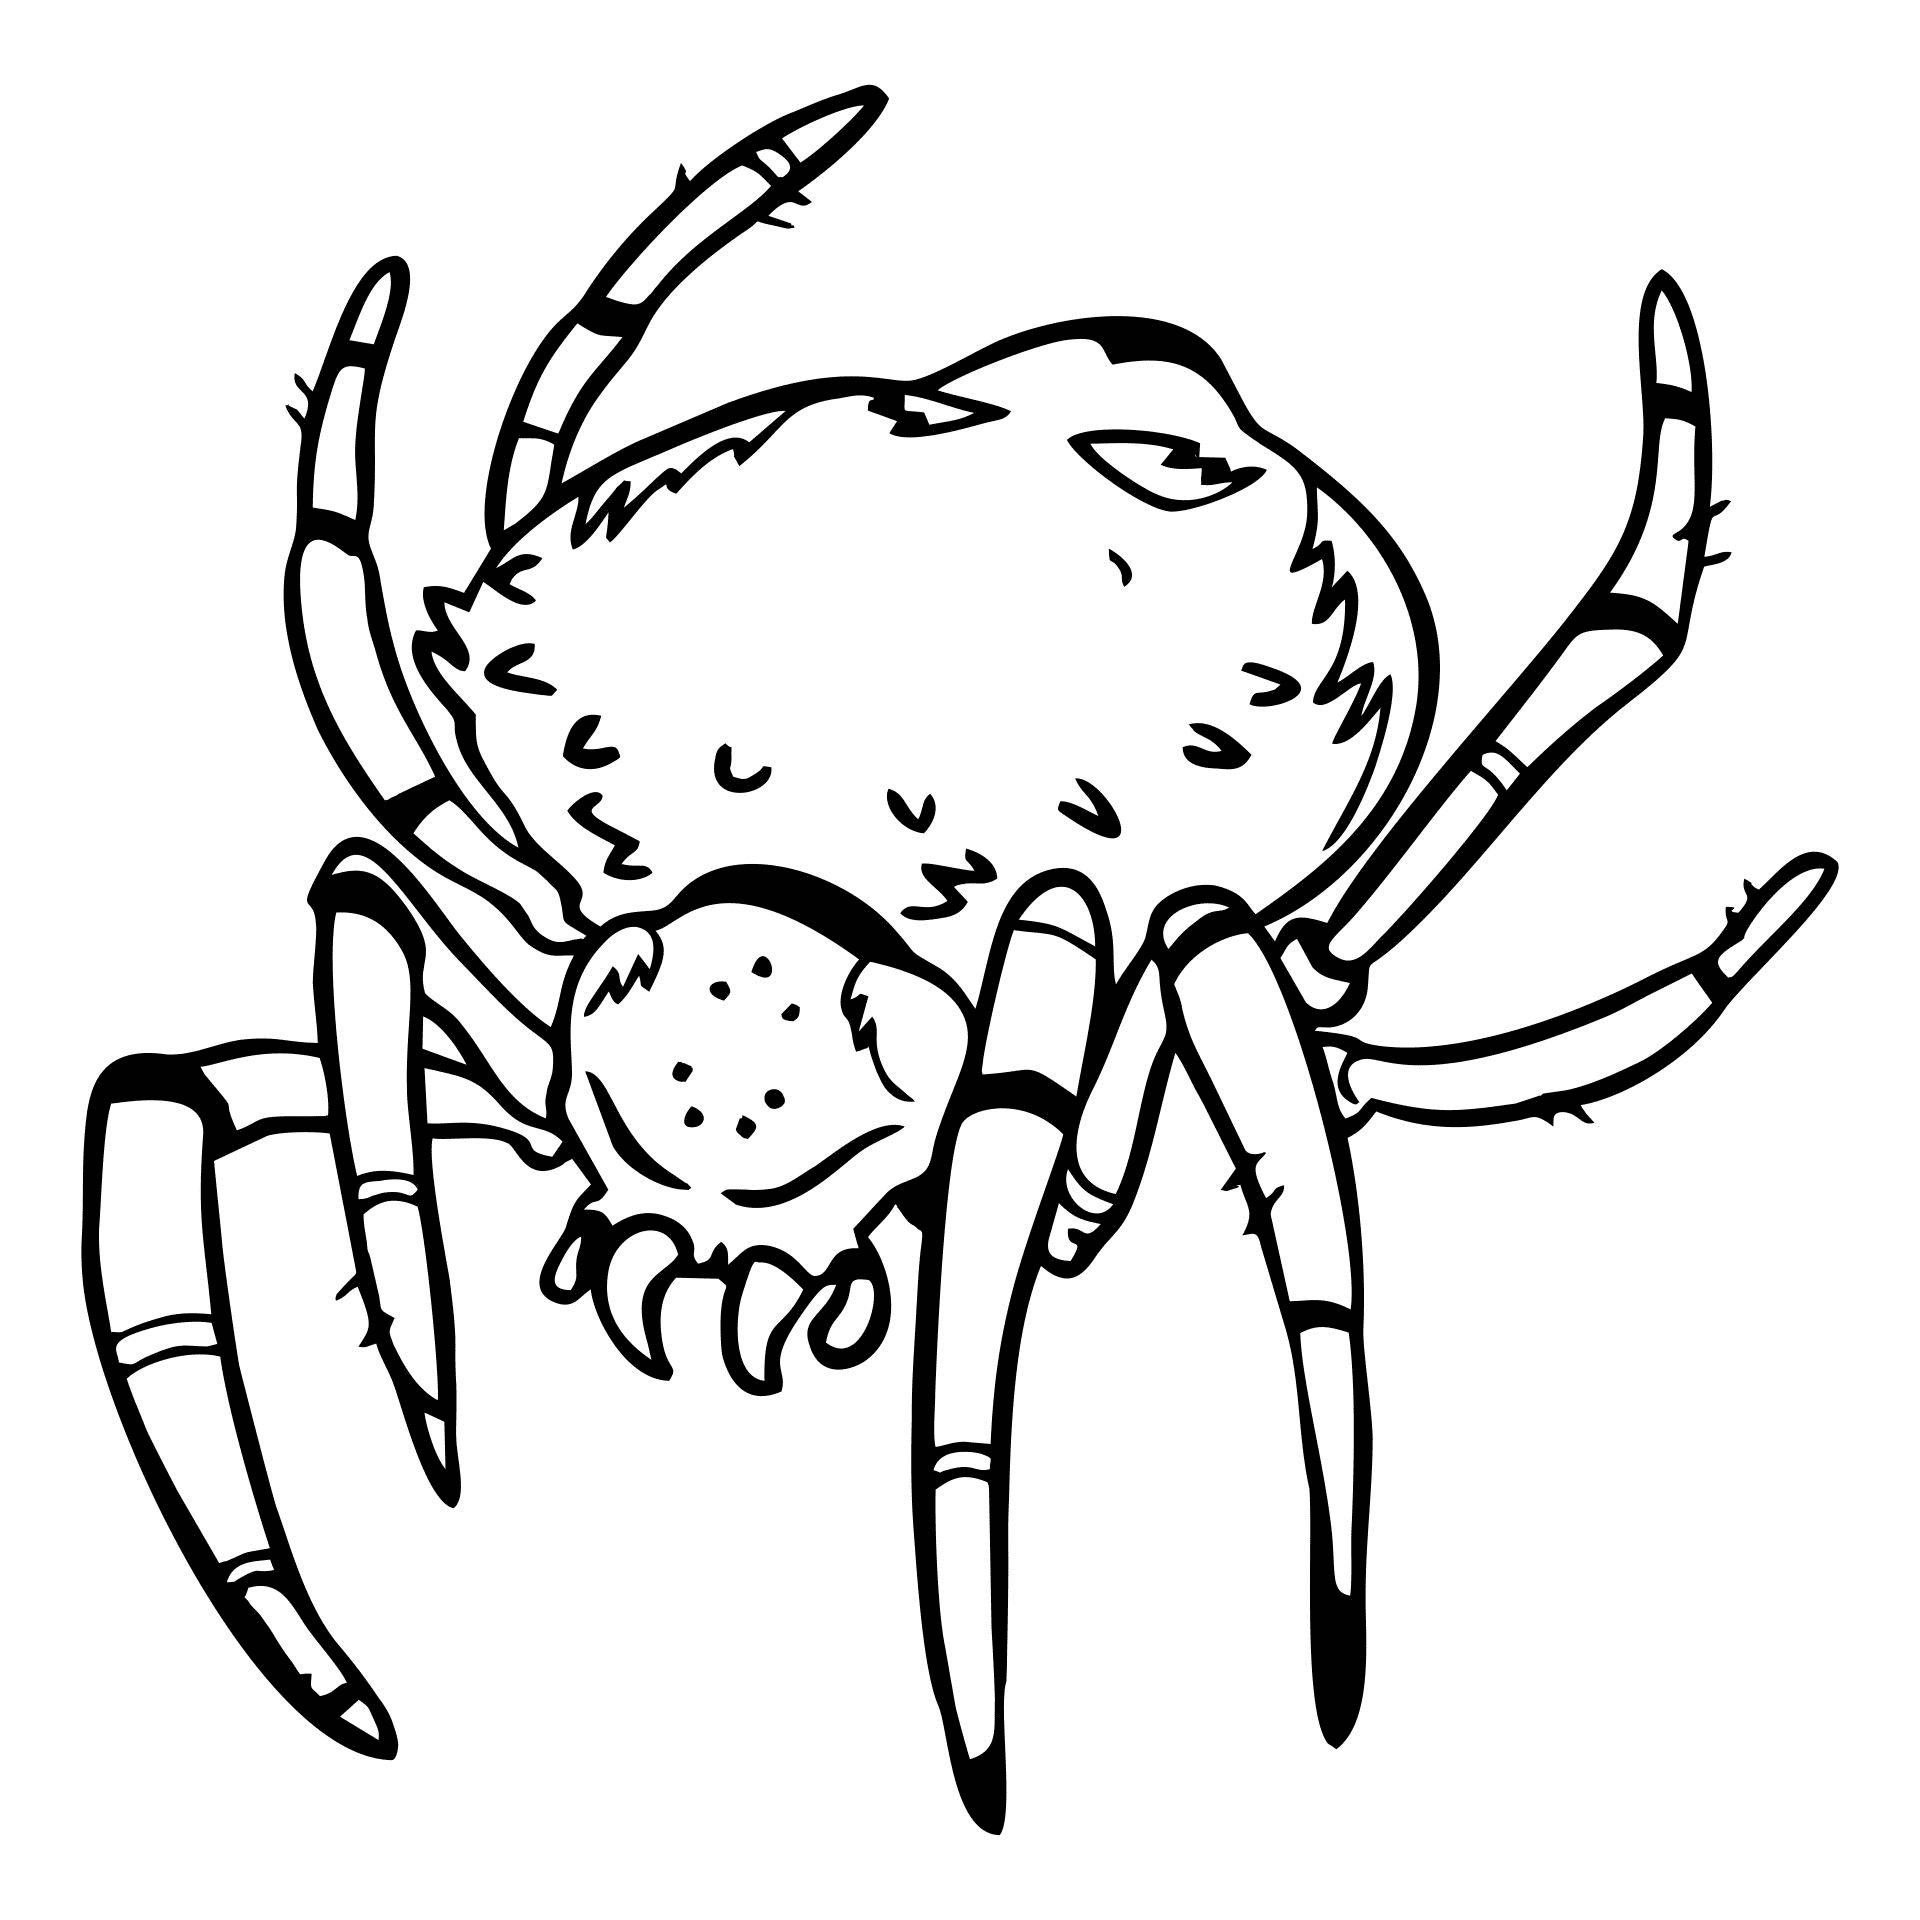 Scary Spider Coloring Page